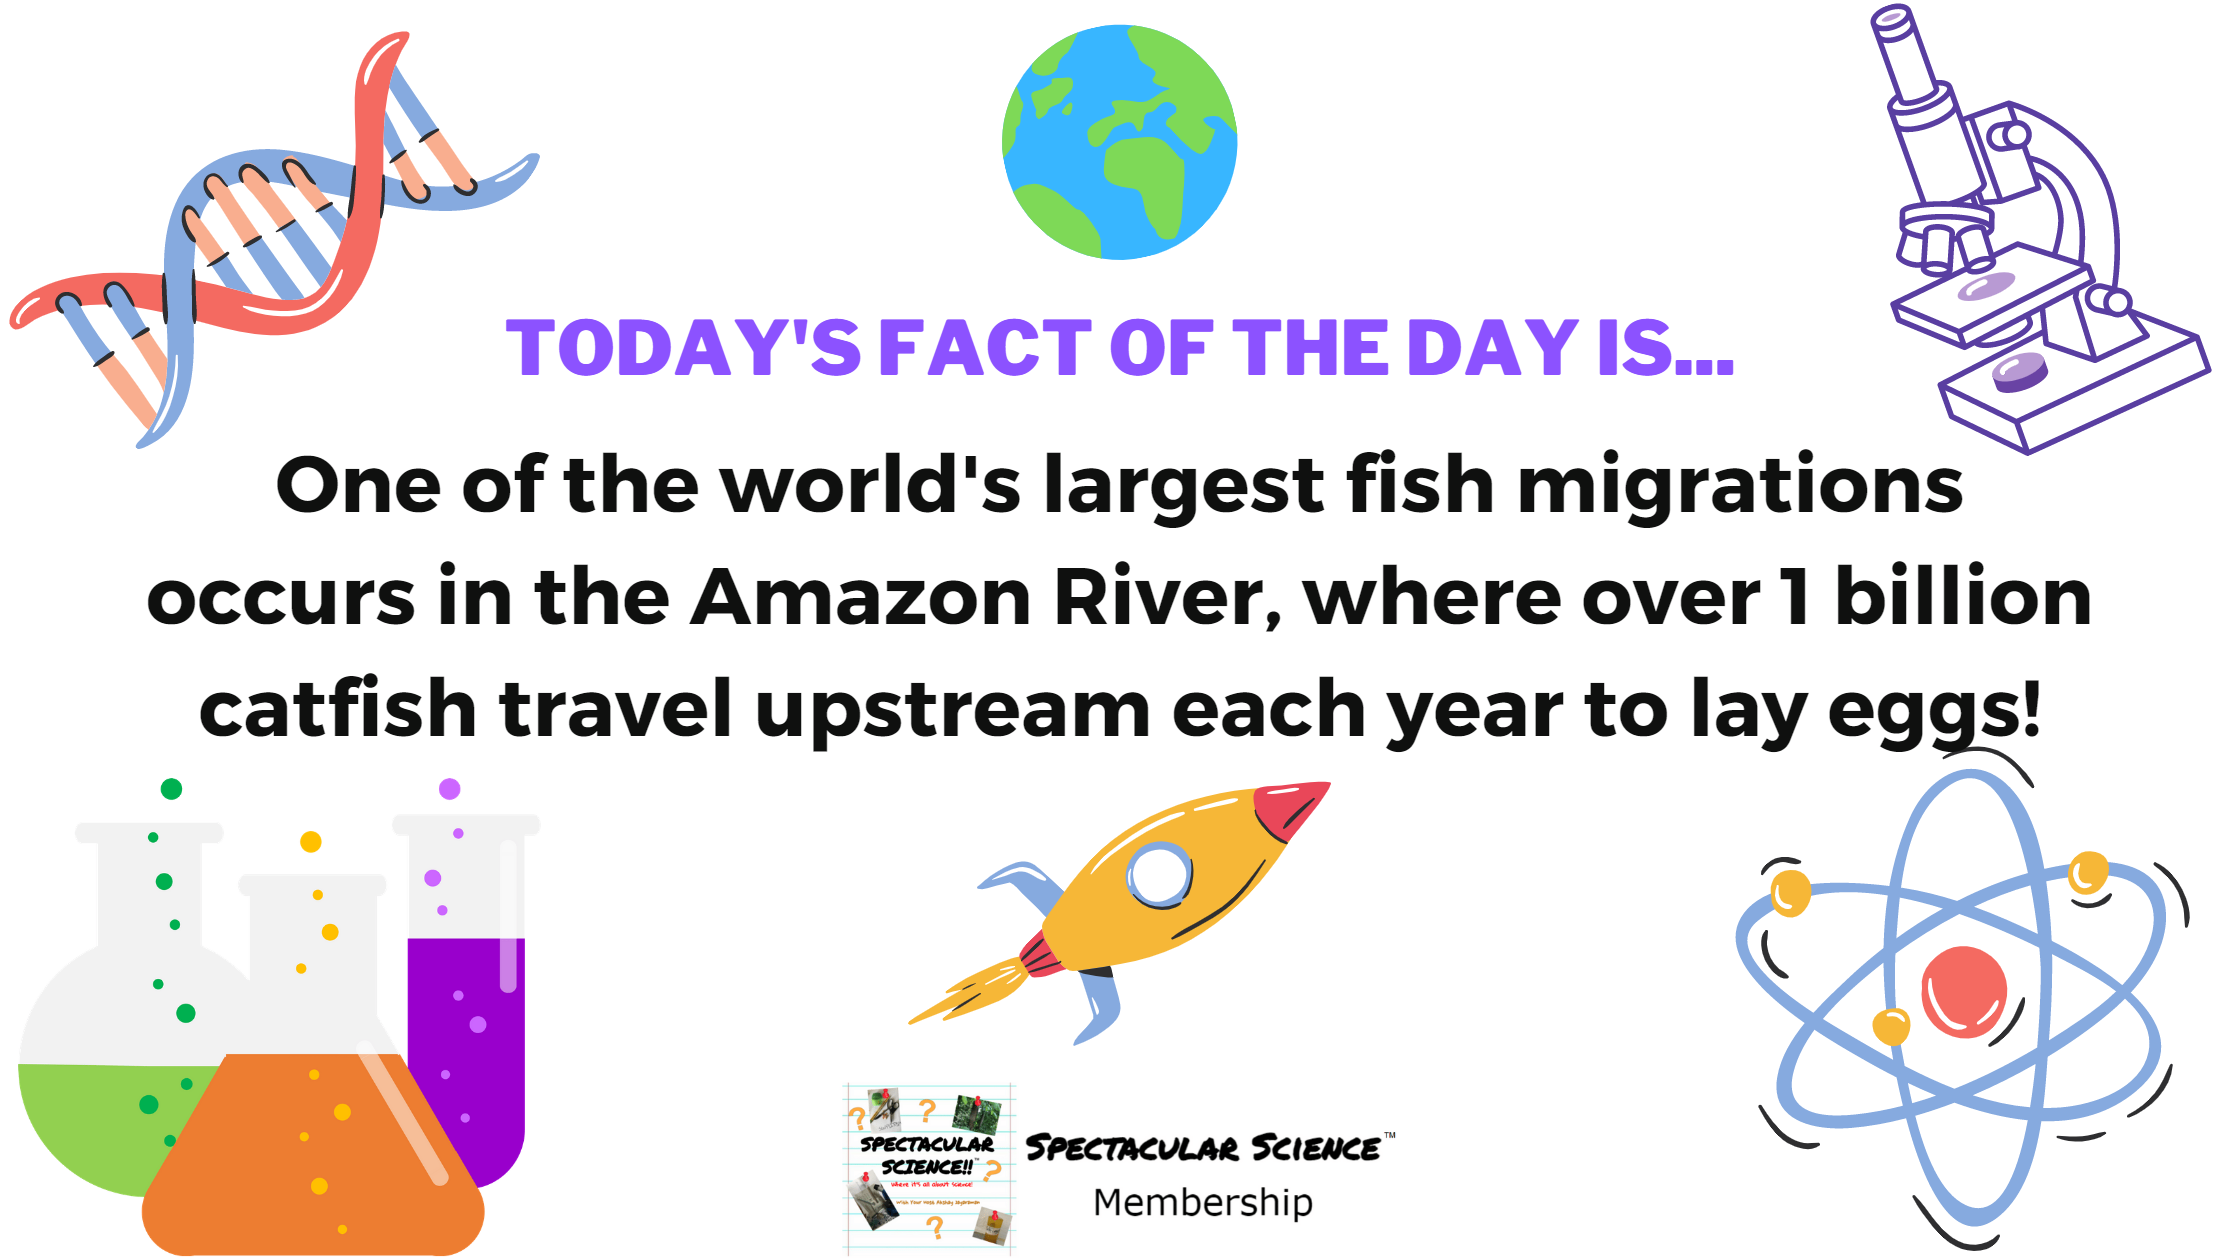 Fact of the Day Image March 20th